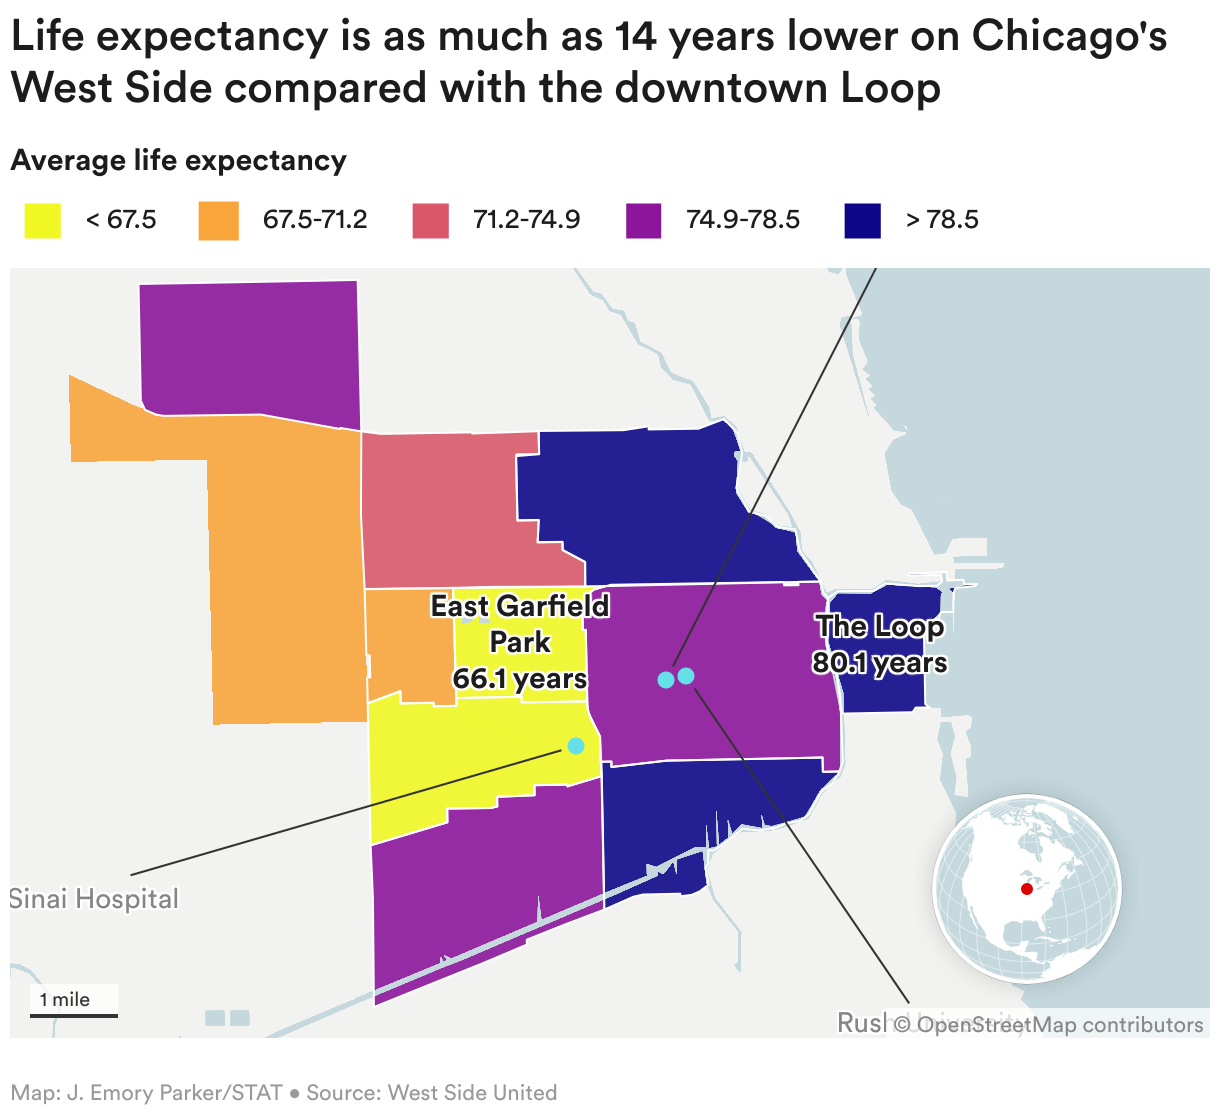 Average life expectancy for community areas like East Garfield Park and North Lawndale are much lower than nearly communities such as The Loop